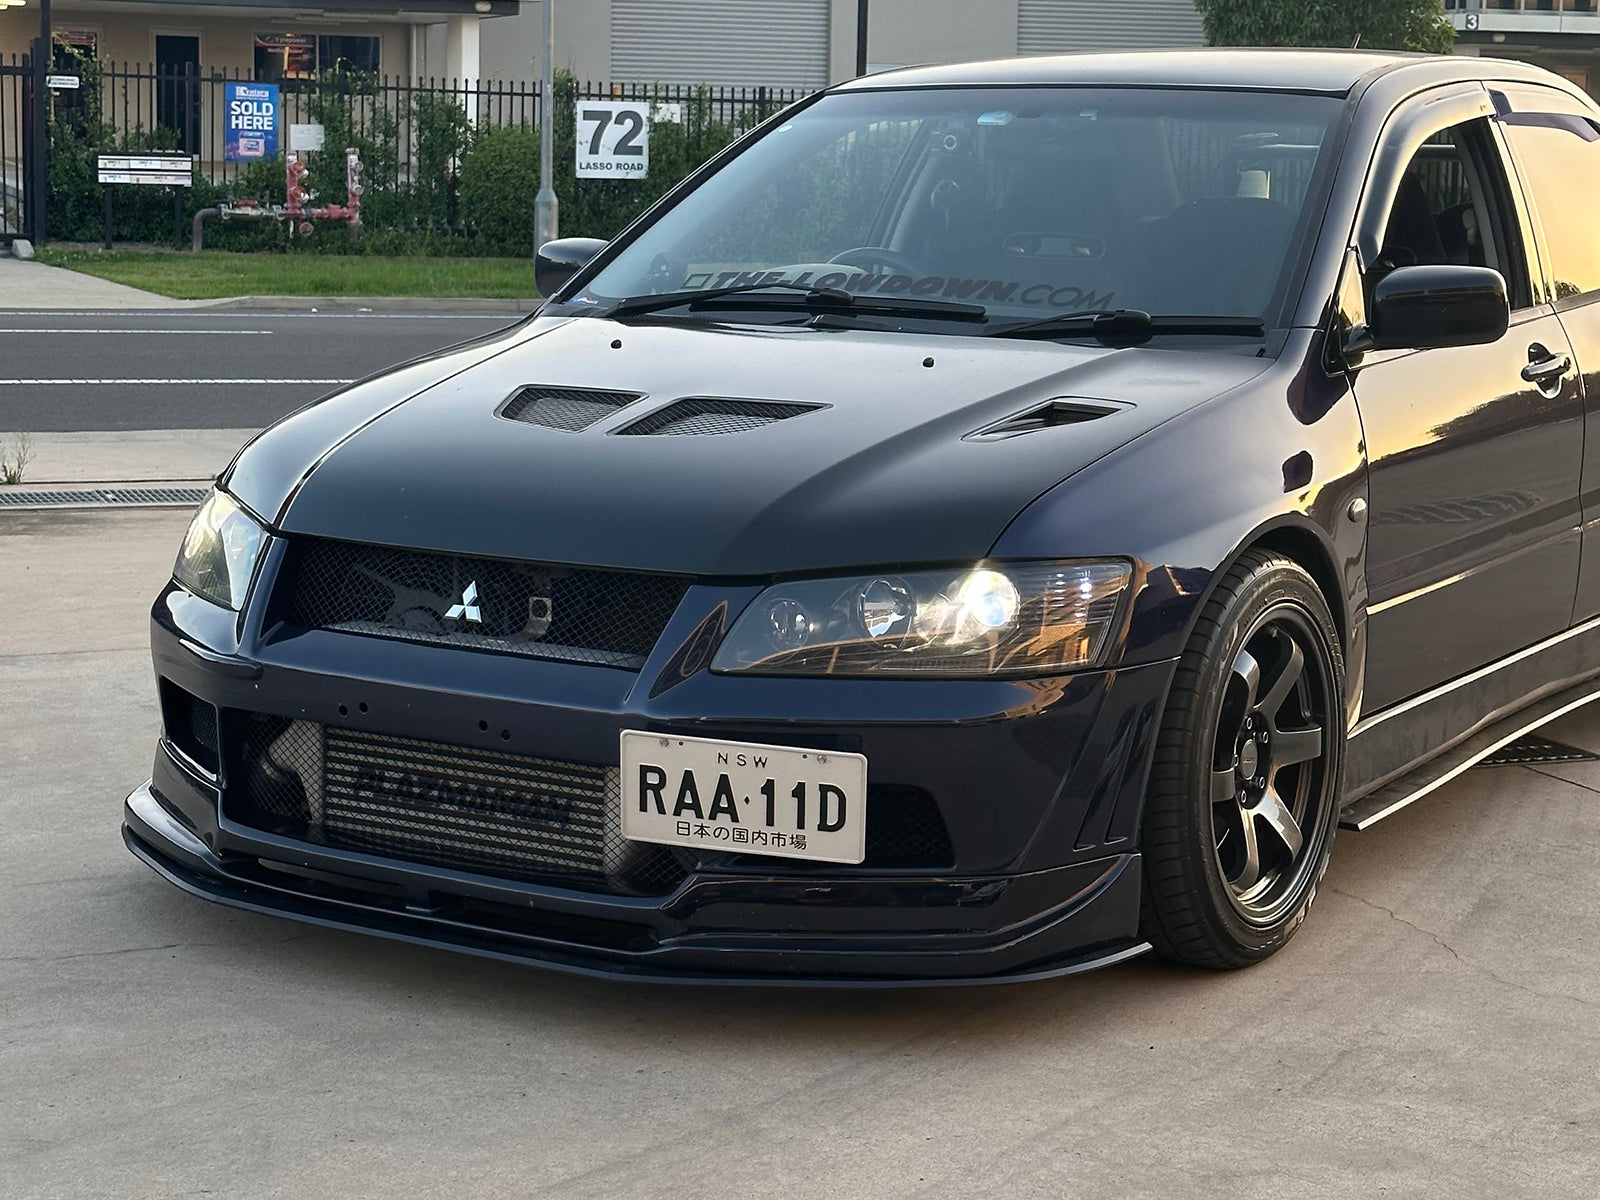 The Evo 7 Front Splitter Lip works in conjunction with the Kansai Front Lip